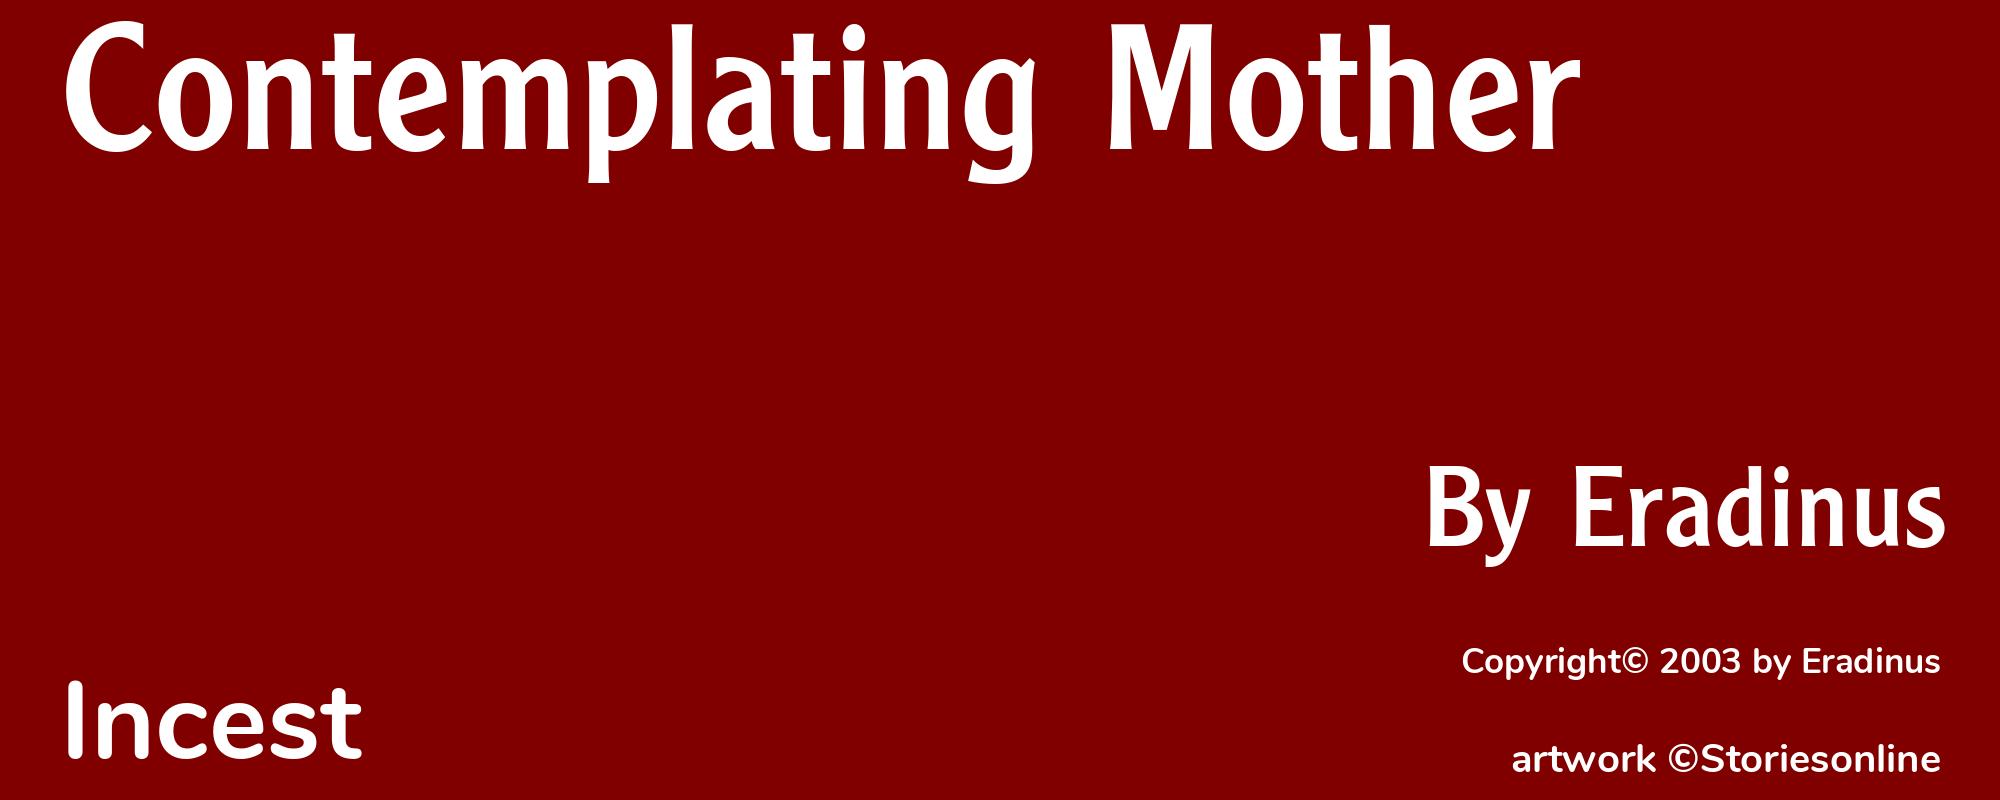 Contemplating Mother - Cover